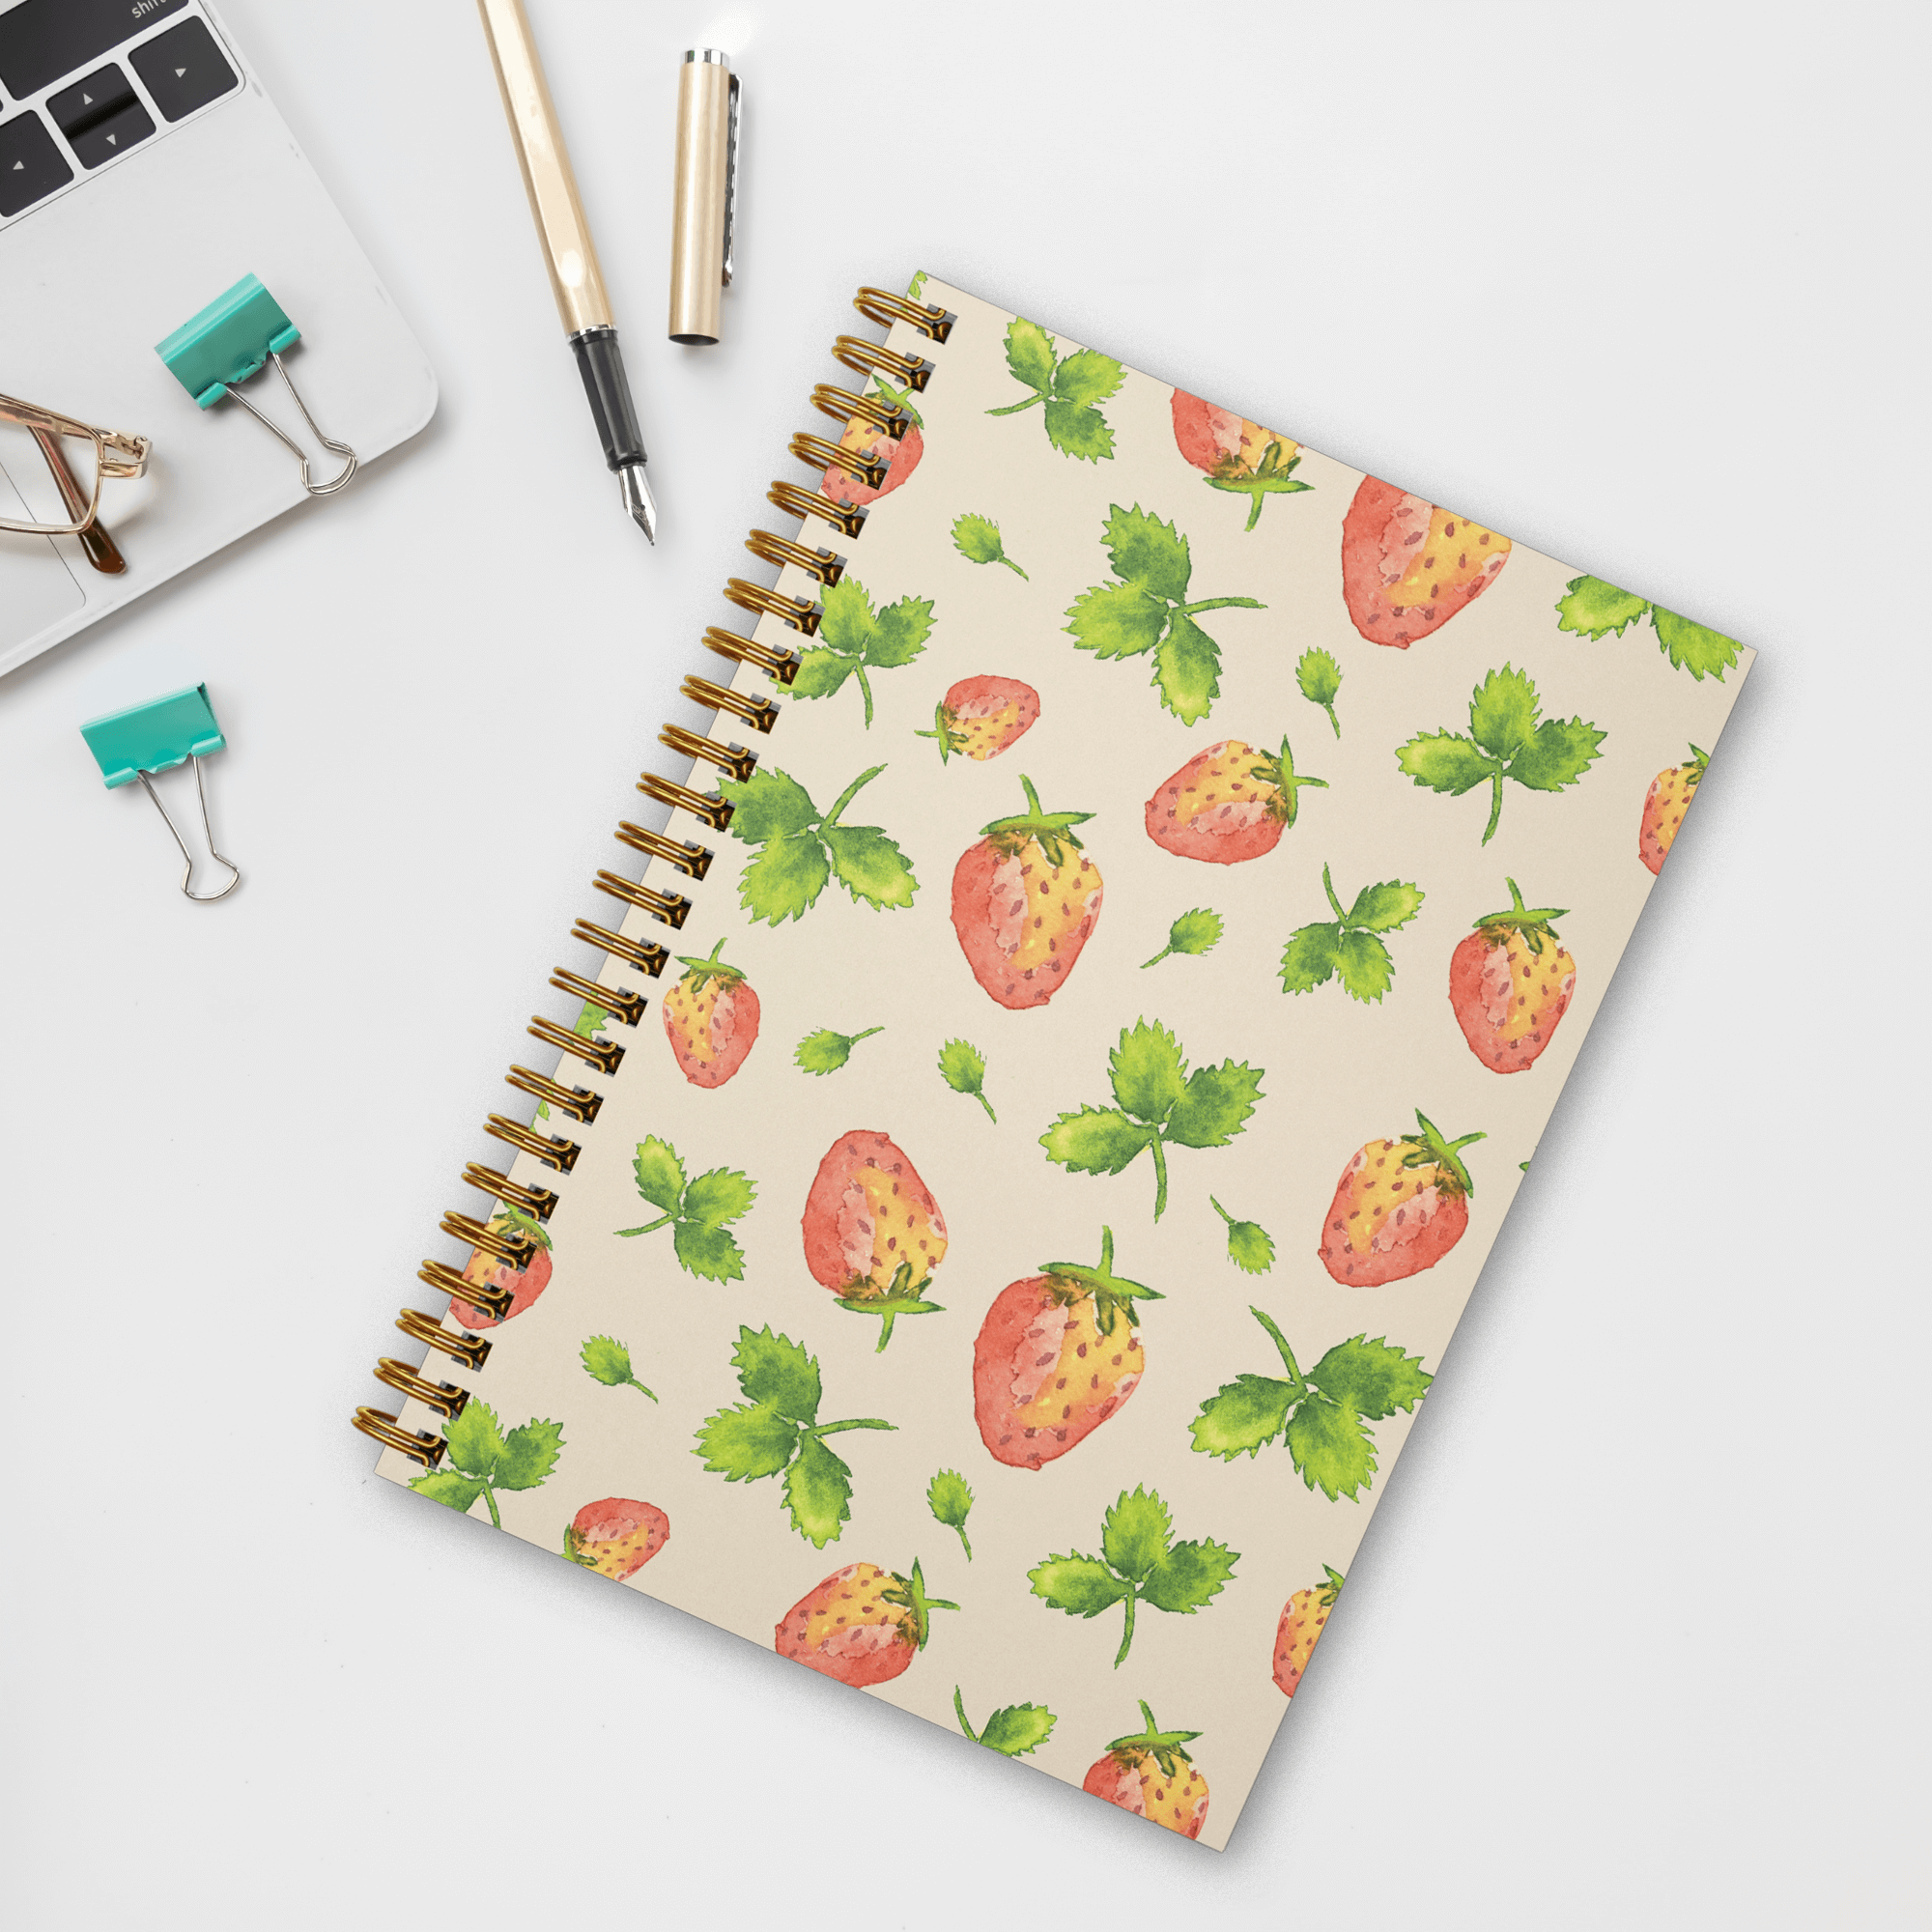 A photo of a wire spiral-bound notebook featuring watercolor-painted strawberries and leaves in a tossed pattern on the recycled cover laying on a white desk with clips, a pen, glasses, and part of a laptop showing.